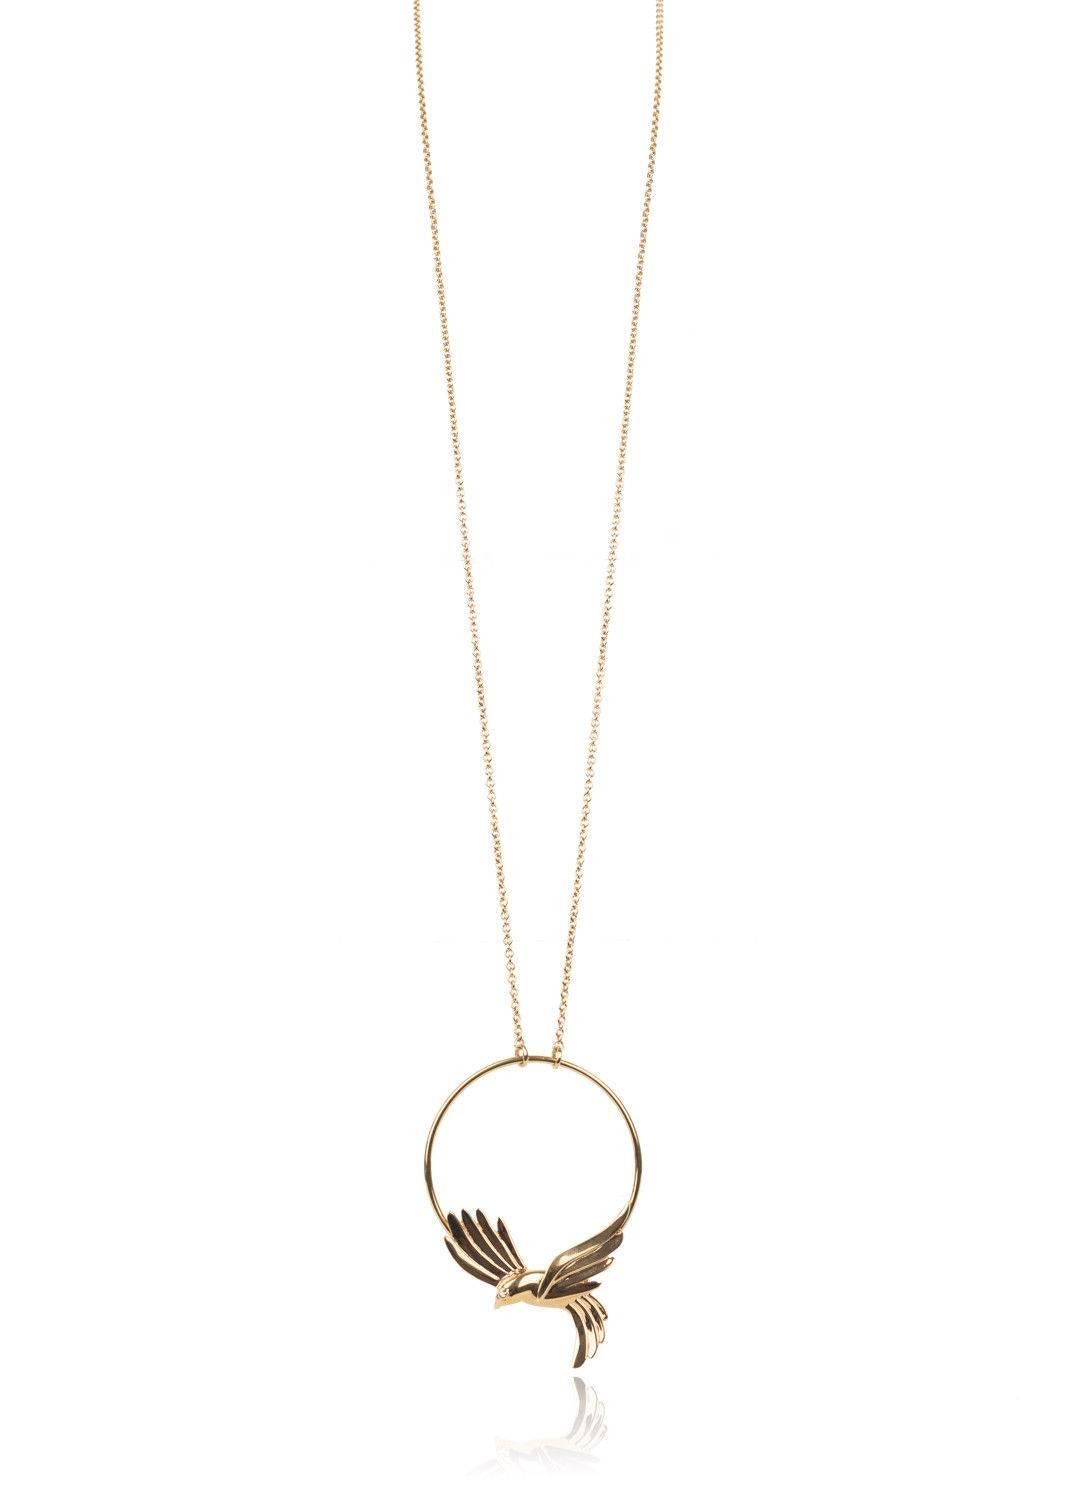 Roberto Cavalli Gold Plated Bird Pendant Long Necklace In New Condition For Sale In Brooklyn, NY